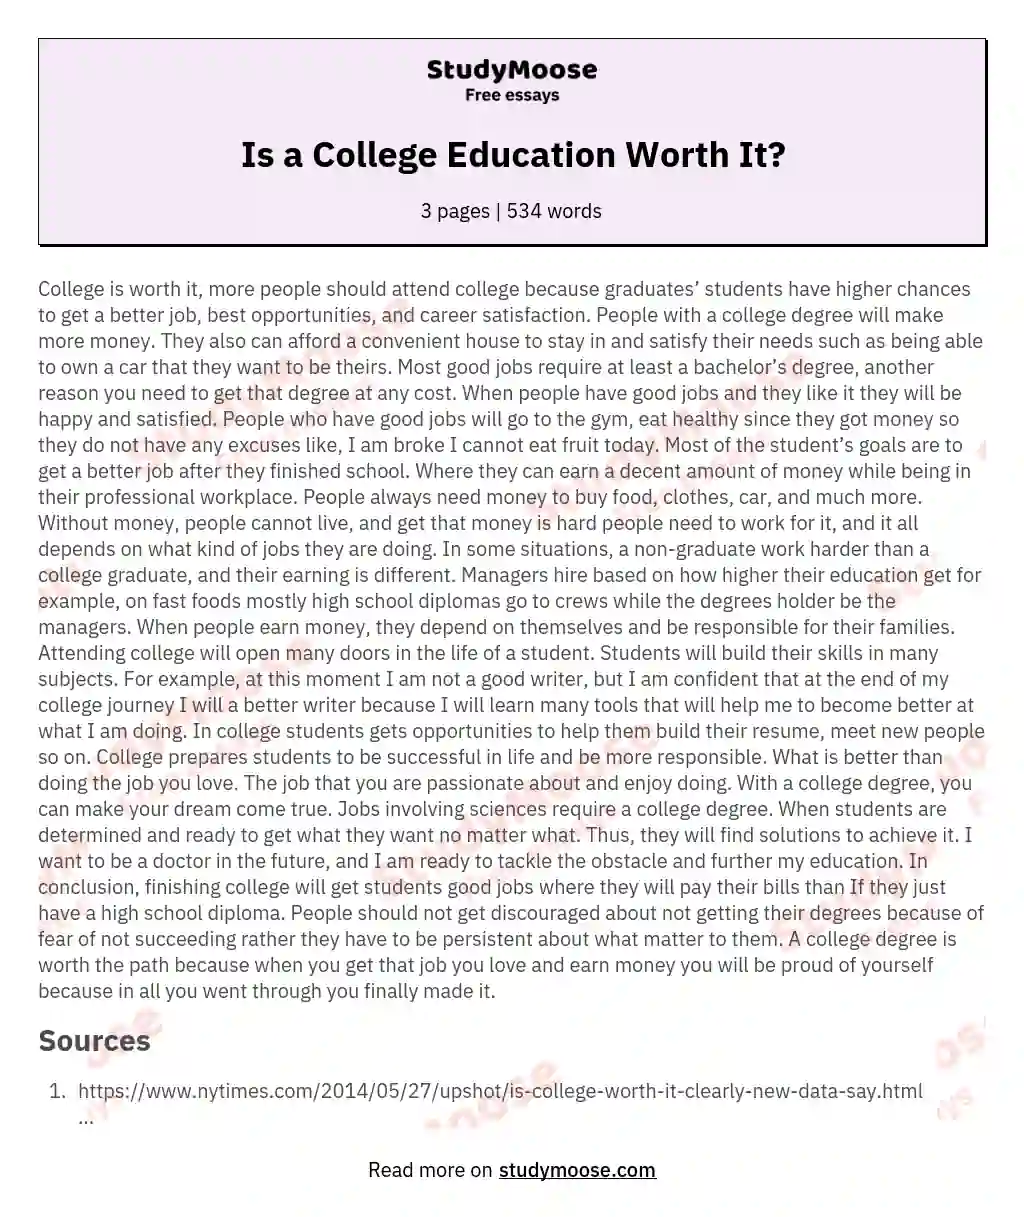 Is a College Education Worth It?